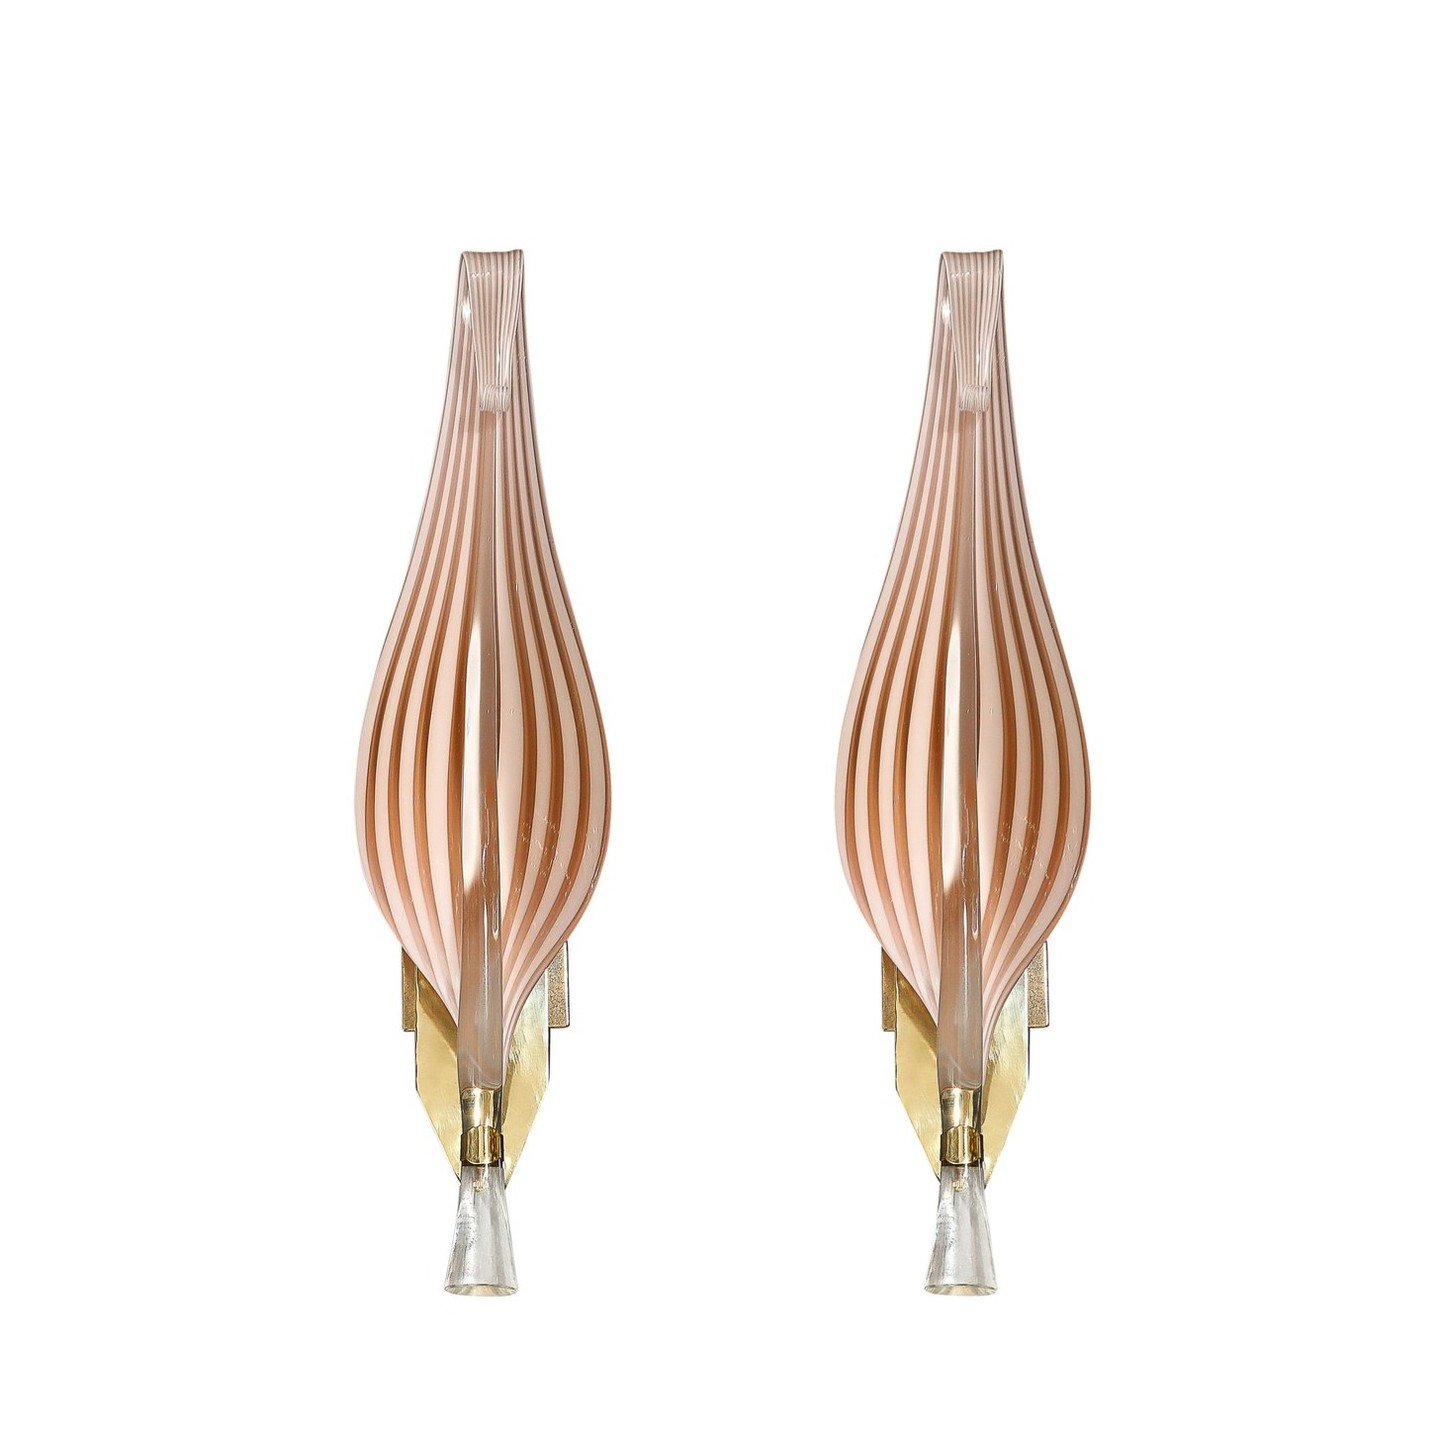 Mid-Century Modernist Hand-Blown Murano Glass Leaf Sconces by Franco Luce

This highly elegant Pair of Mid-Century Modernist Hand-Blown Murano Glass Leaf Sconces is by the esteemed glass artist Franco Luce and originates from Italy, Circa 1970. They 